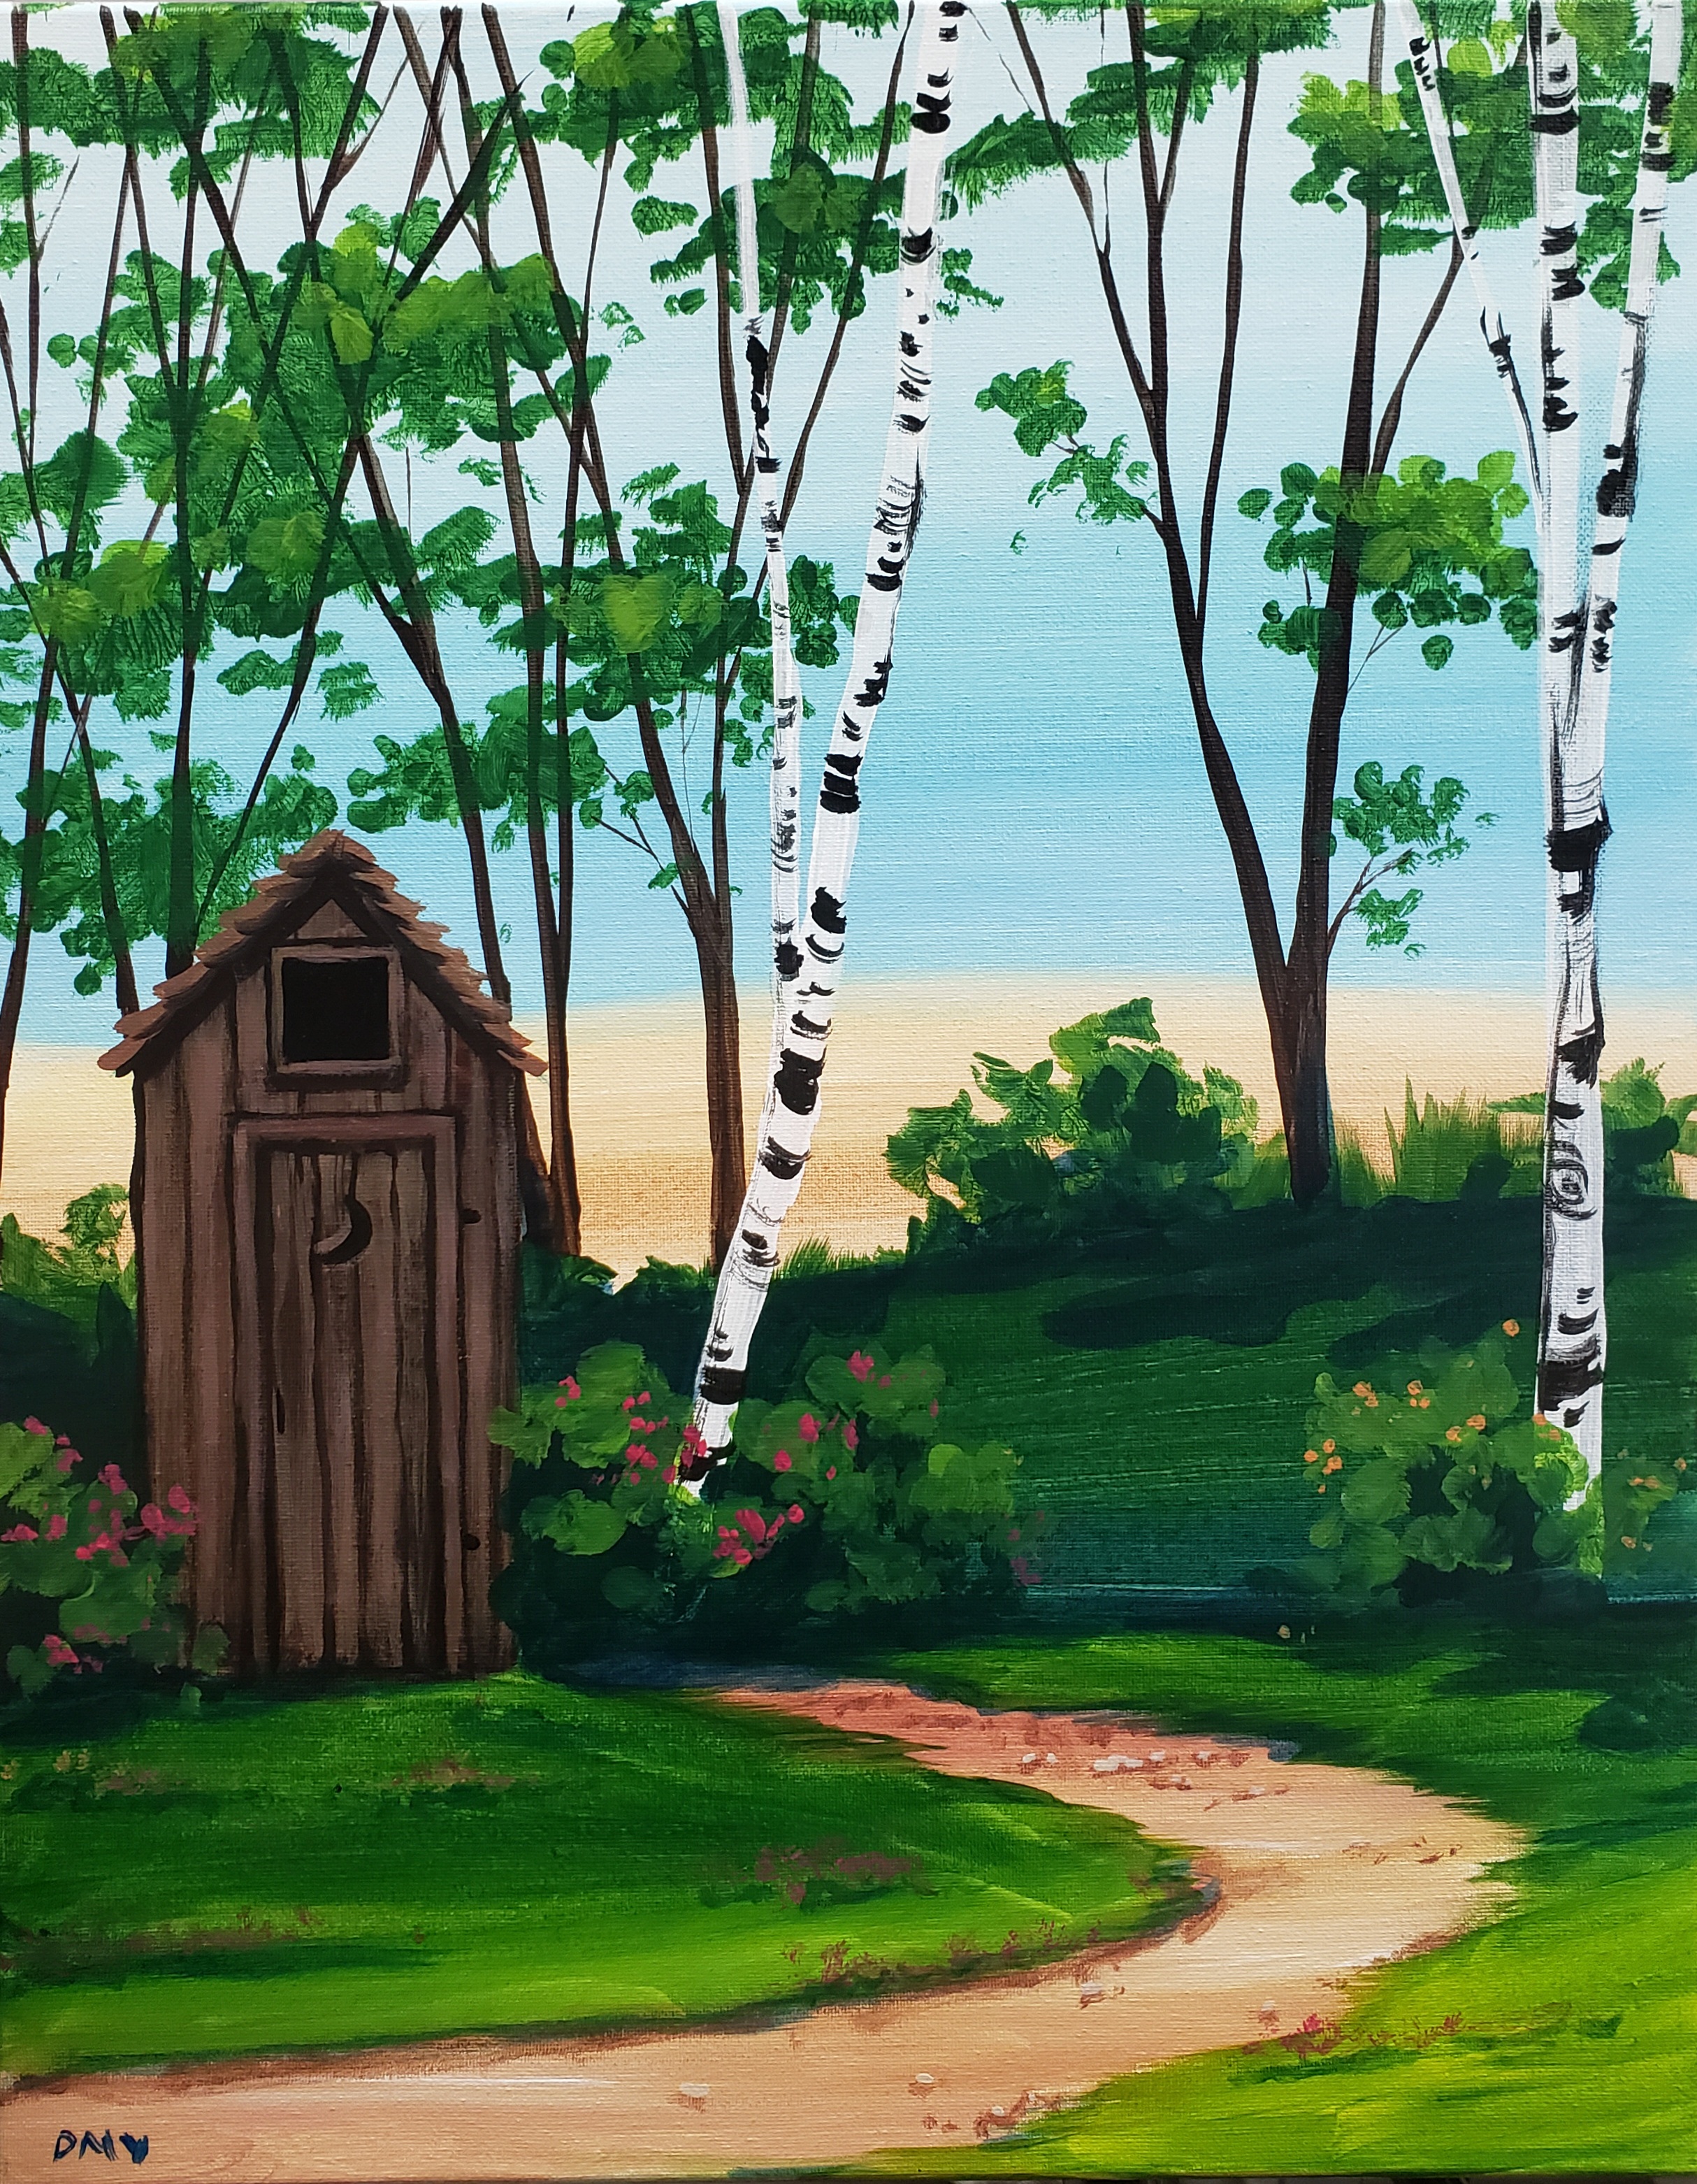 A Country Outhouse experience project by Yaymaker